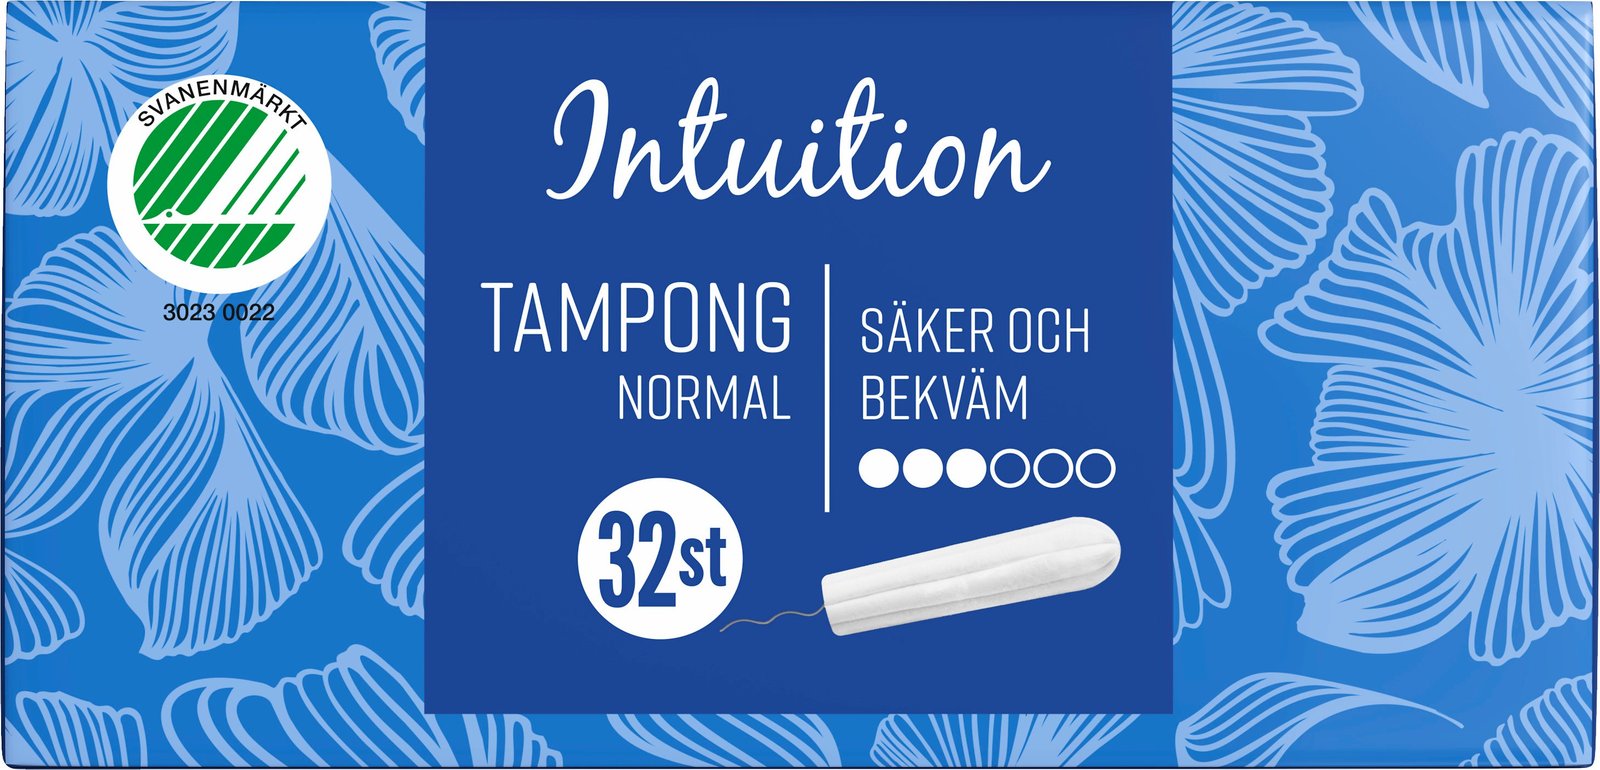 Intuition Tampong Normal 32 st